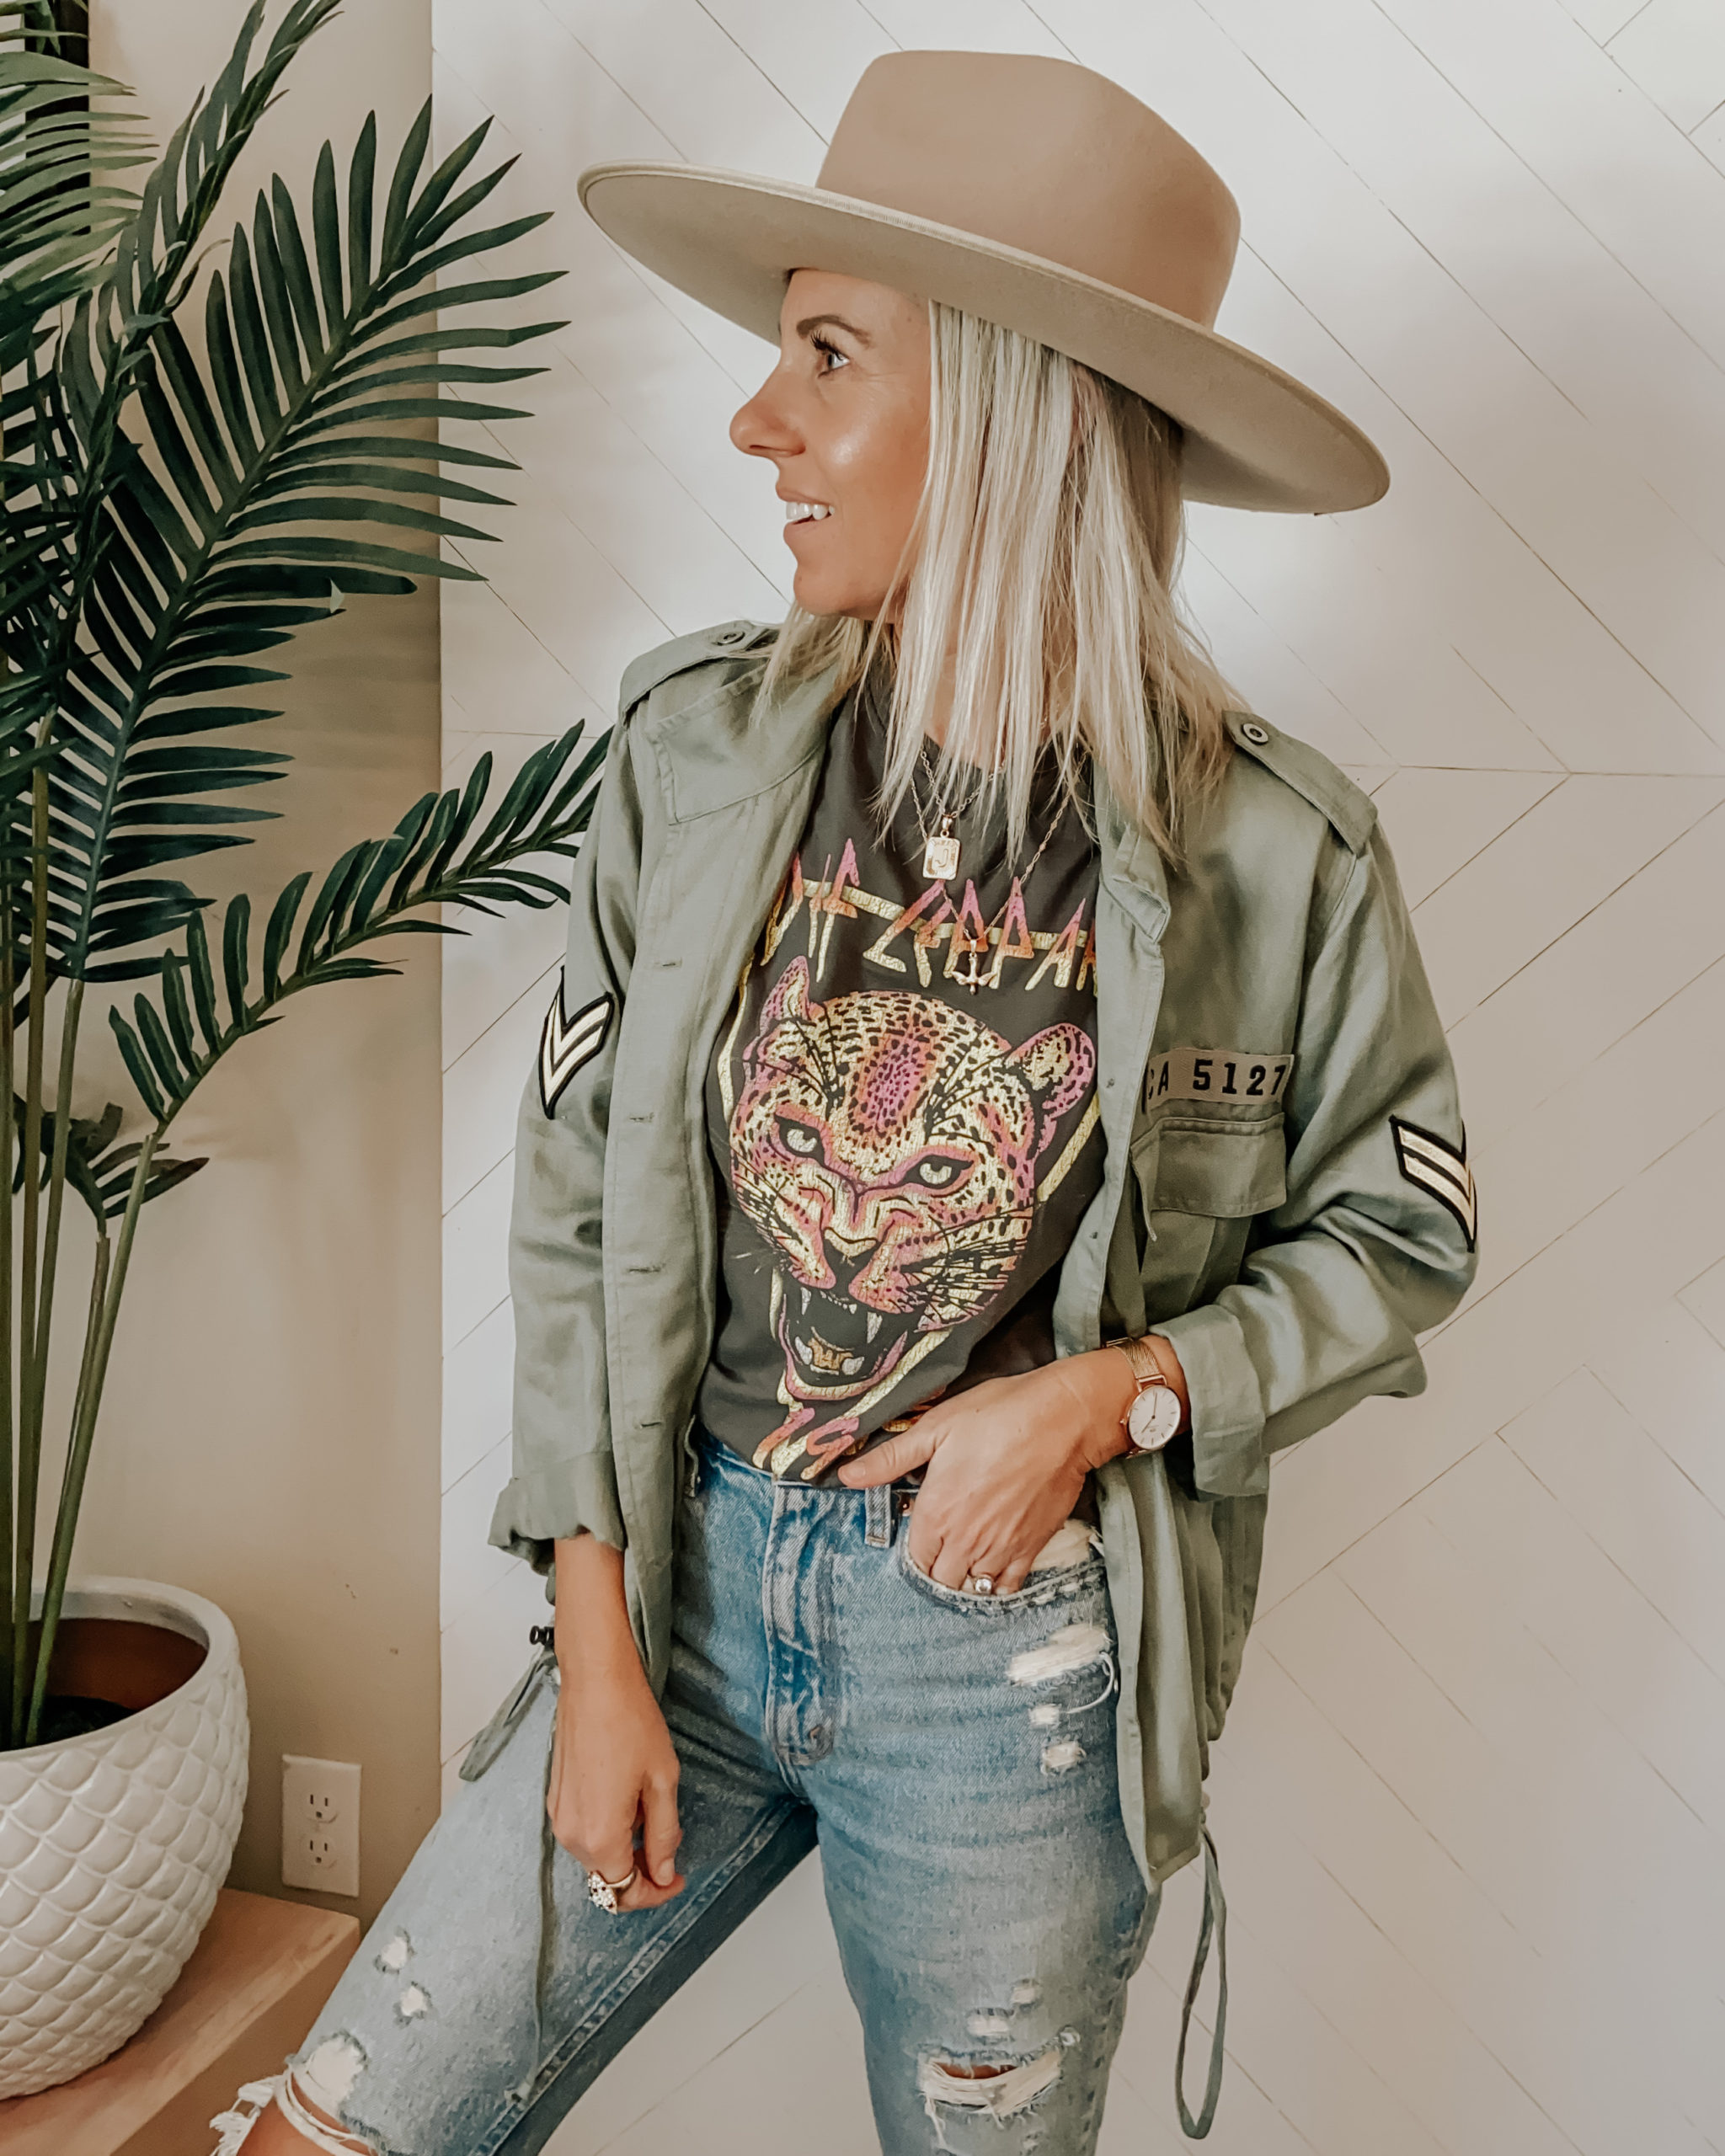 TOP 10 OF 2019- Jaclyn De Leon Style +Sharing the top selling items from 2019 including several Amazon finds, my favorite shoes, jewelry, graphic tees and of course my must have mom jeans.